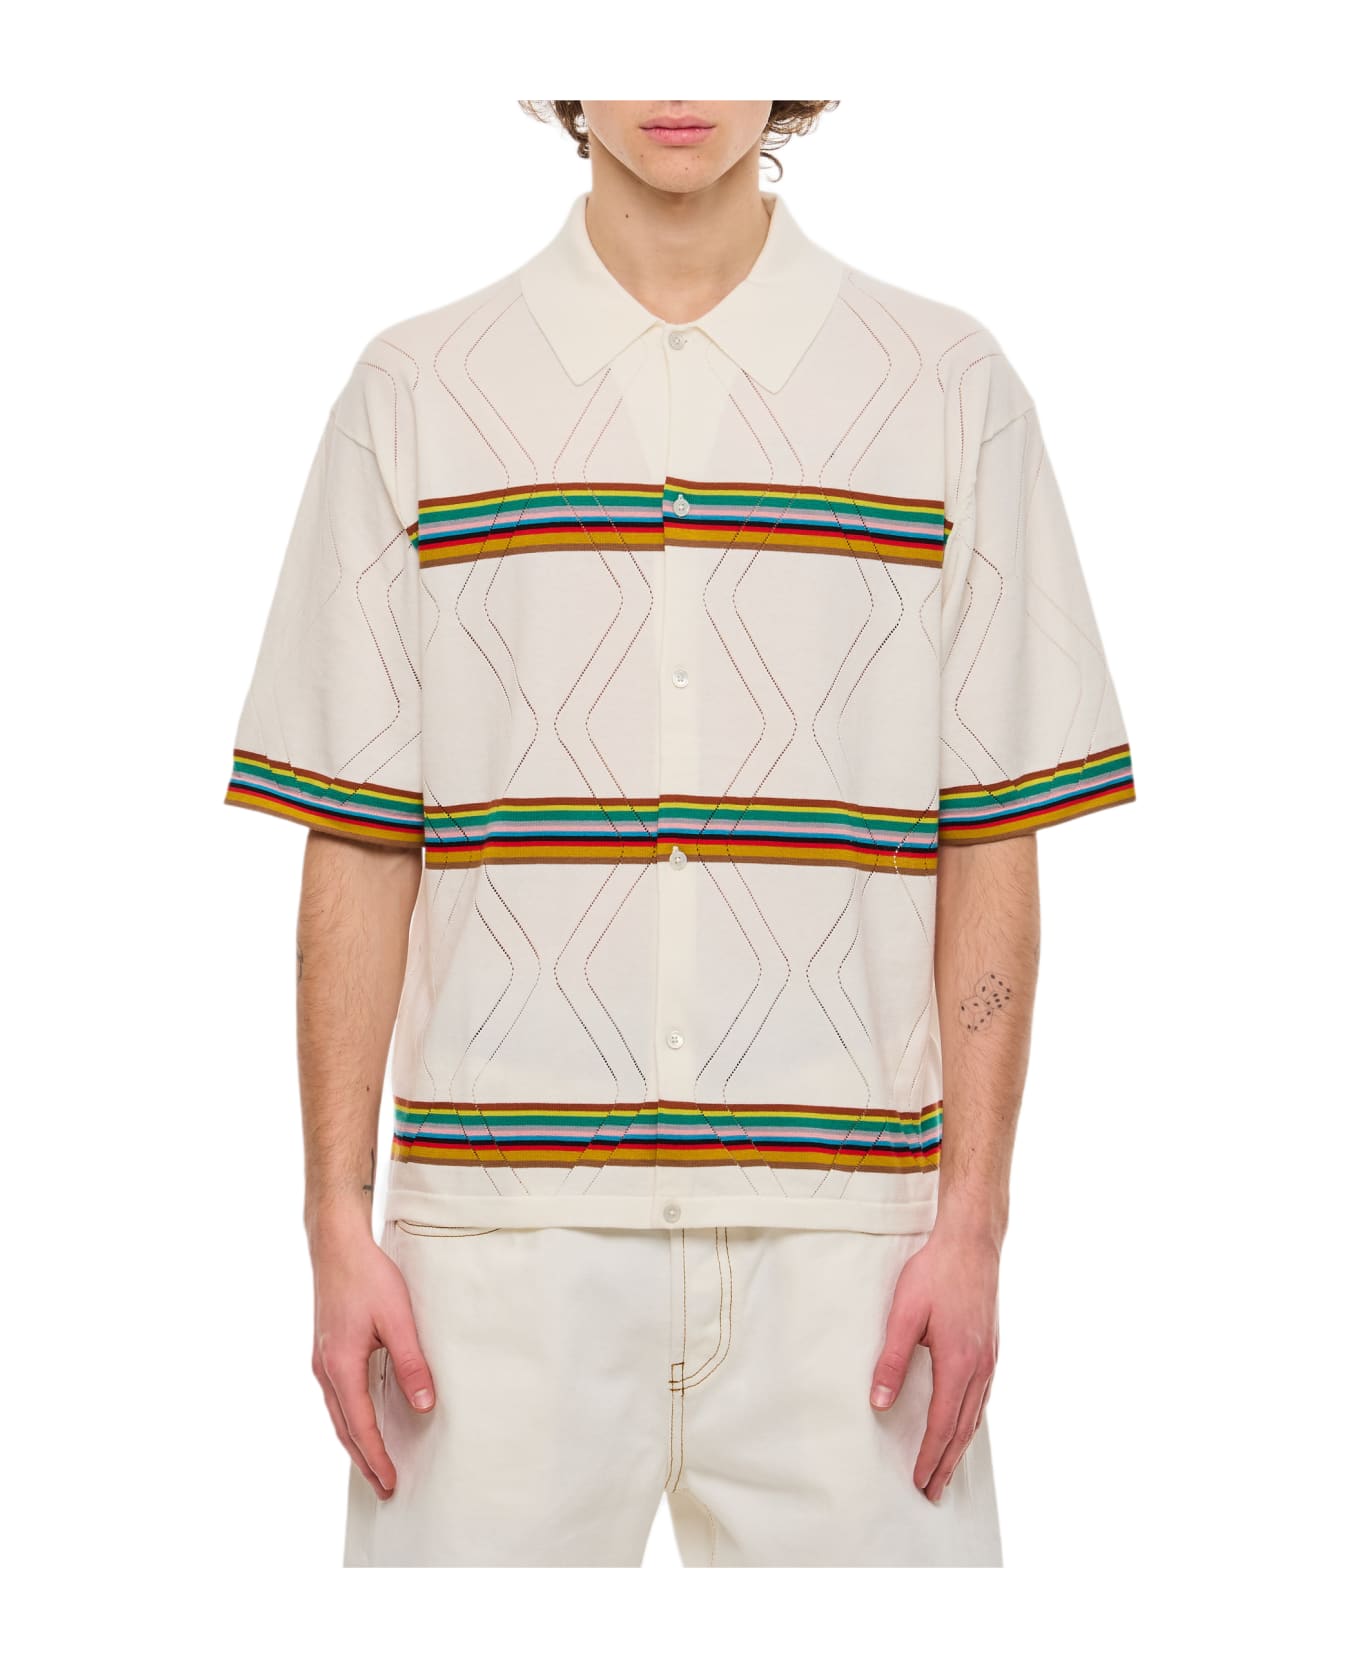 Paul Smith Knitted Ss Shirt - White シャツ